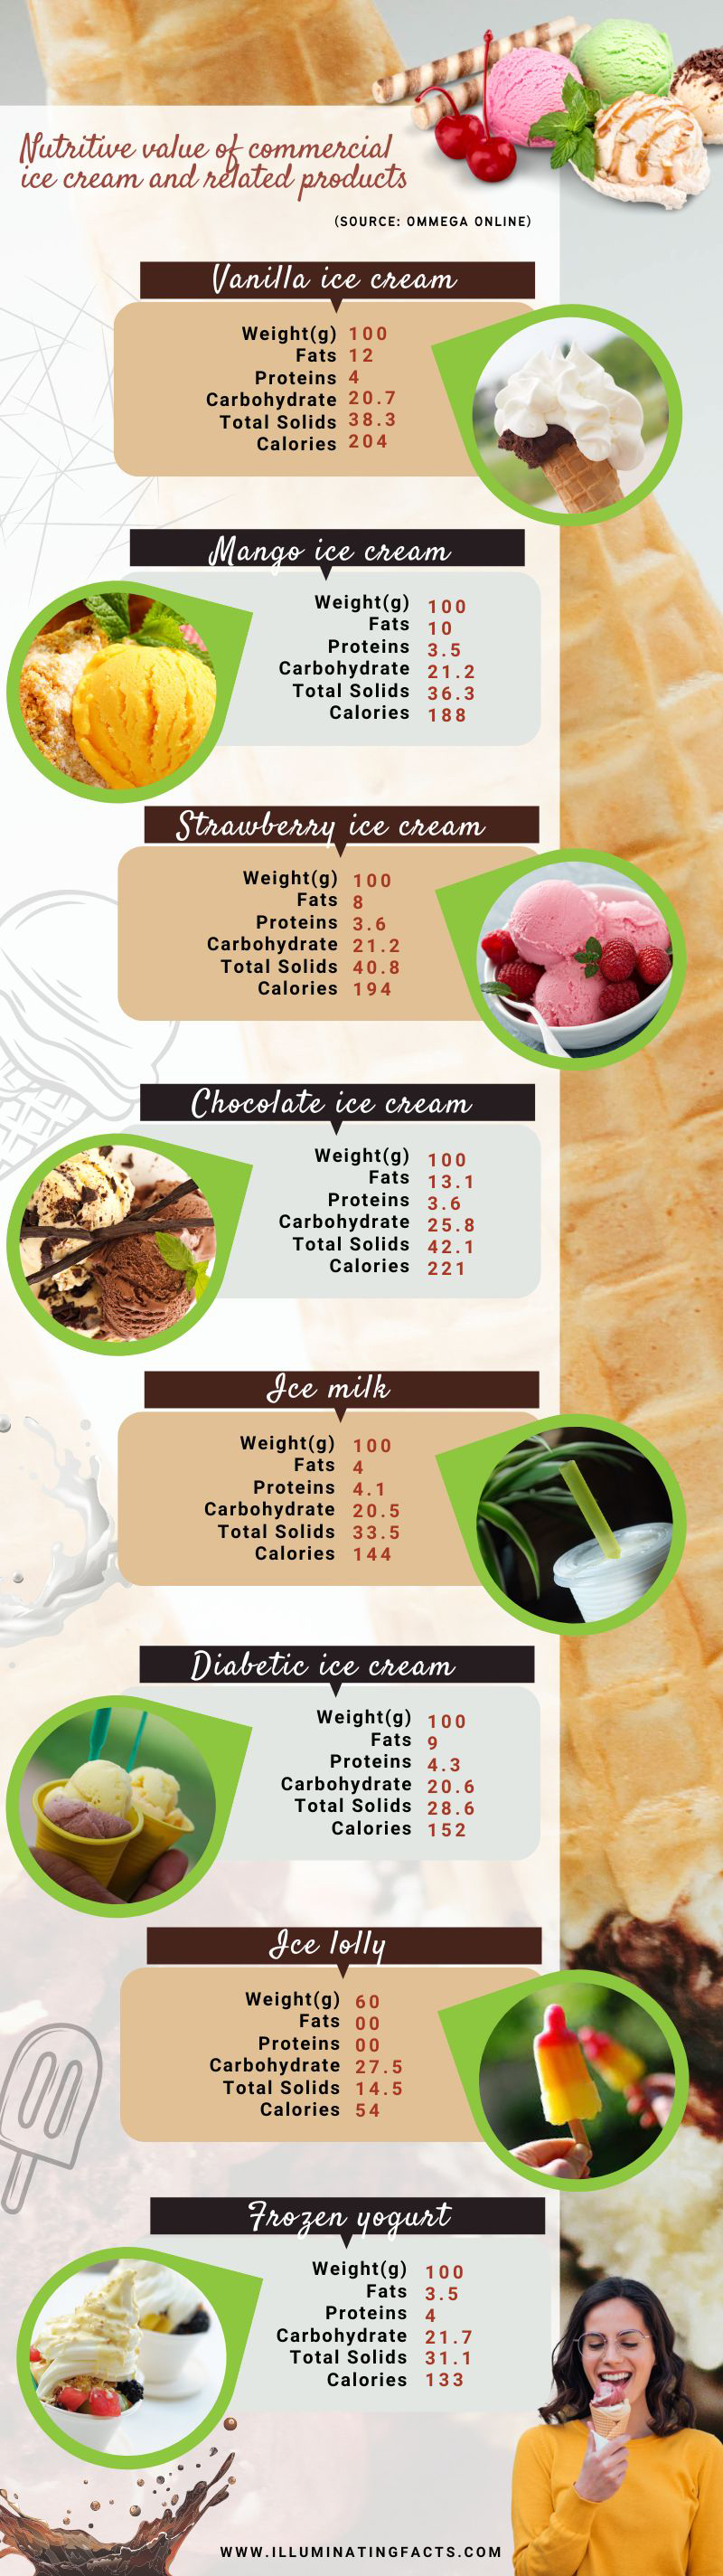 Nutritive value of commercial ice cream and related products